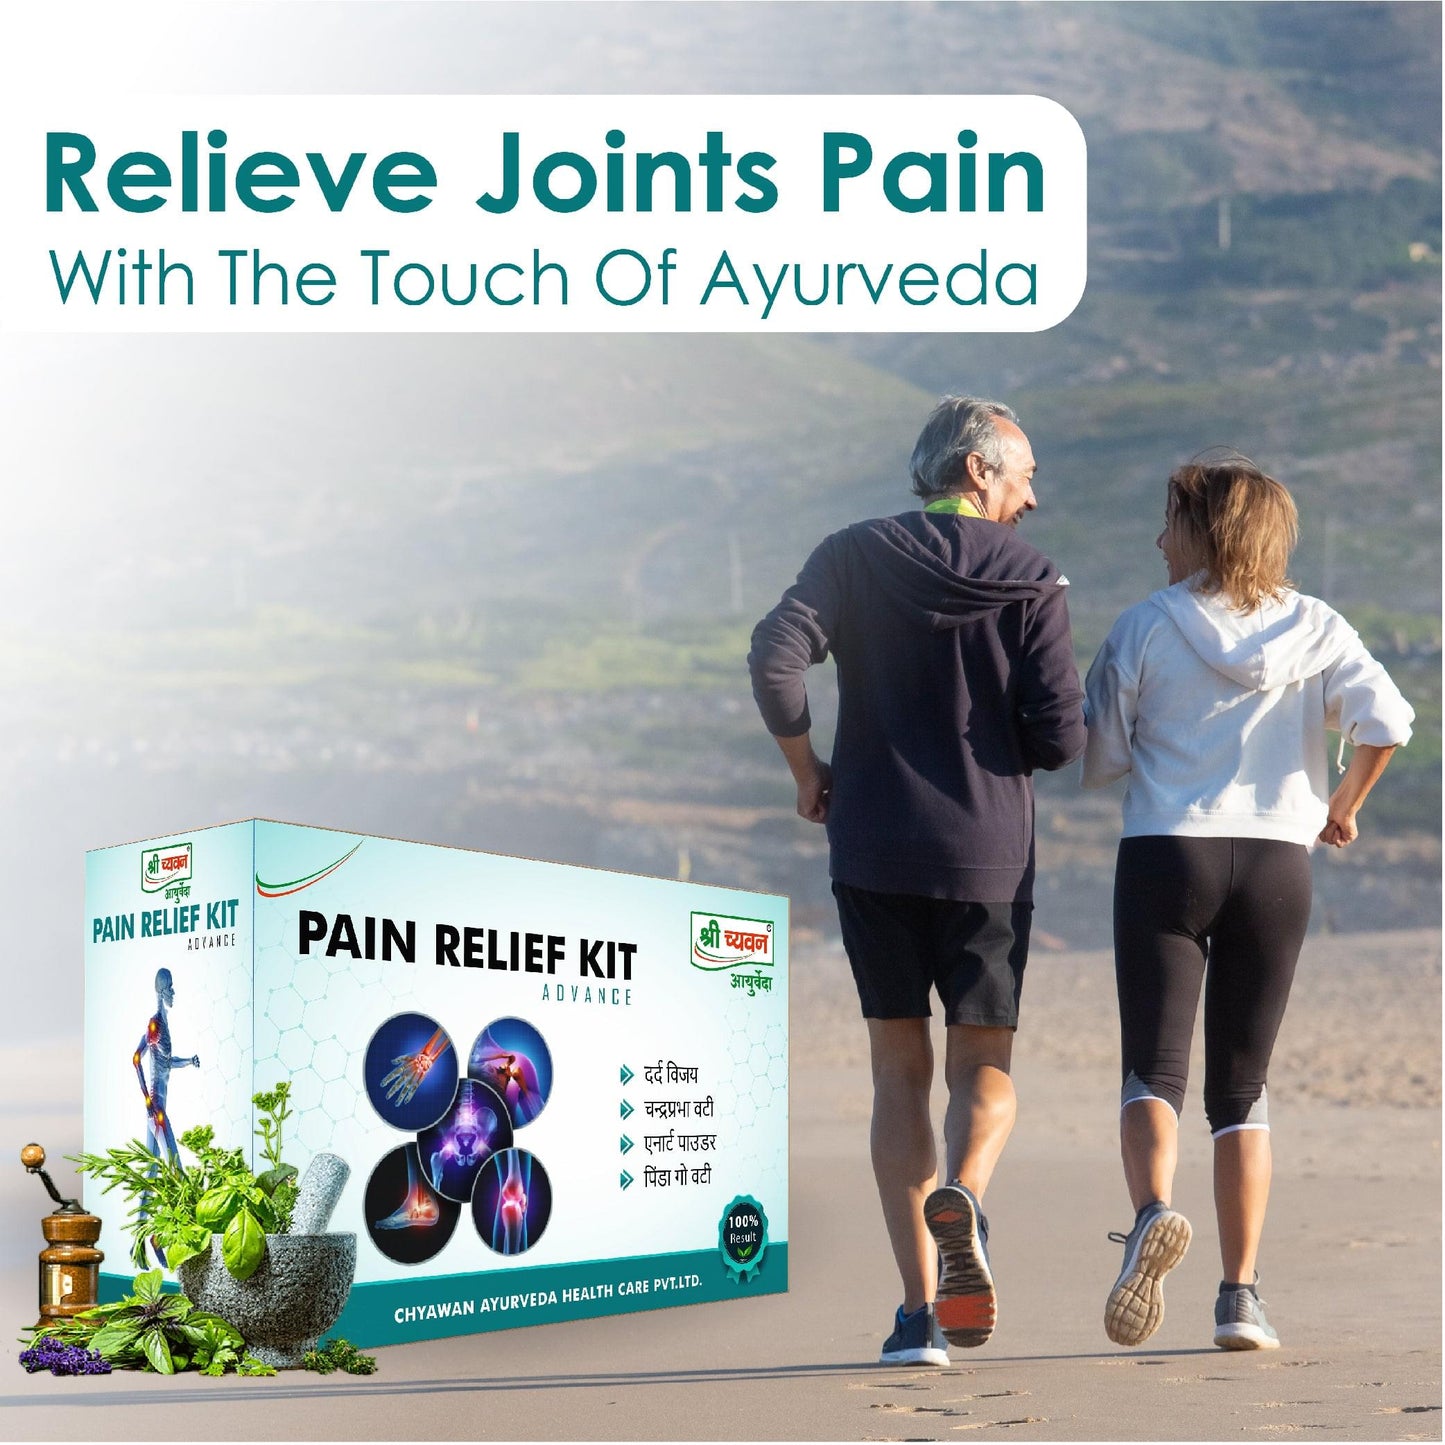 ayurvedic medicine for joint and muscle pain